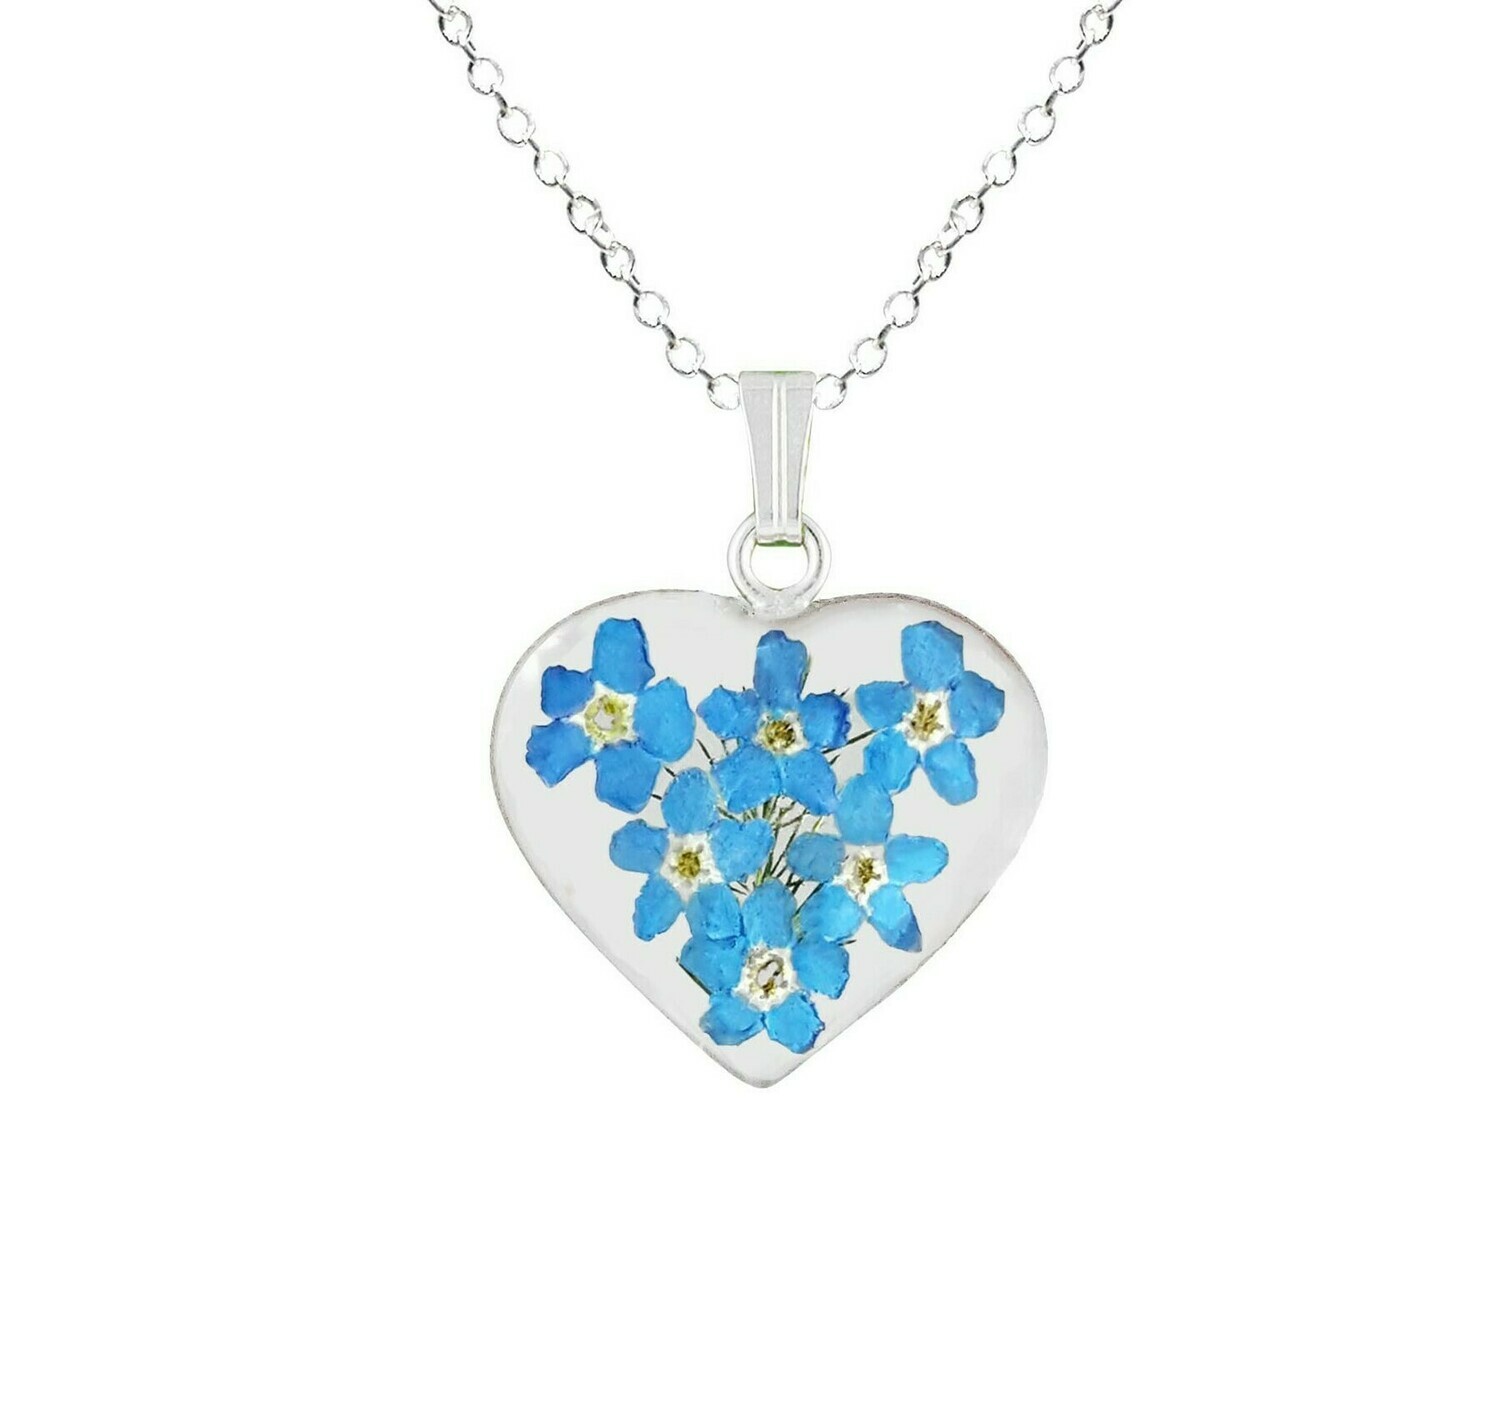 Forget-Me-Not Necklace, Heart Pendant, White Background